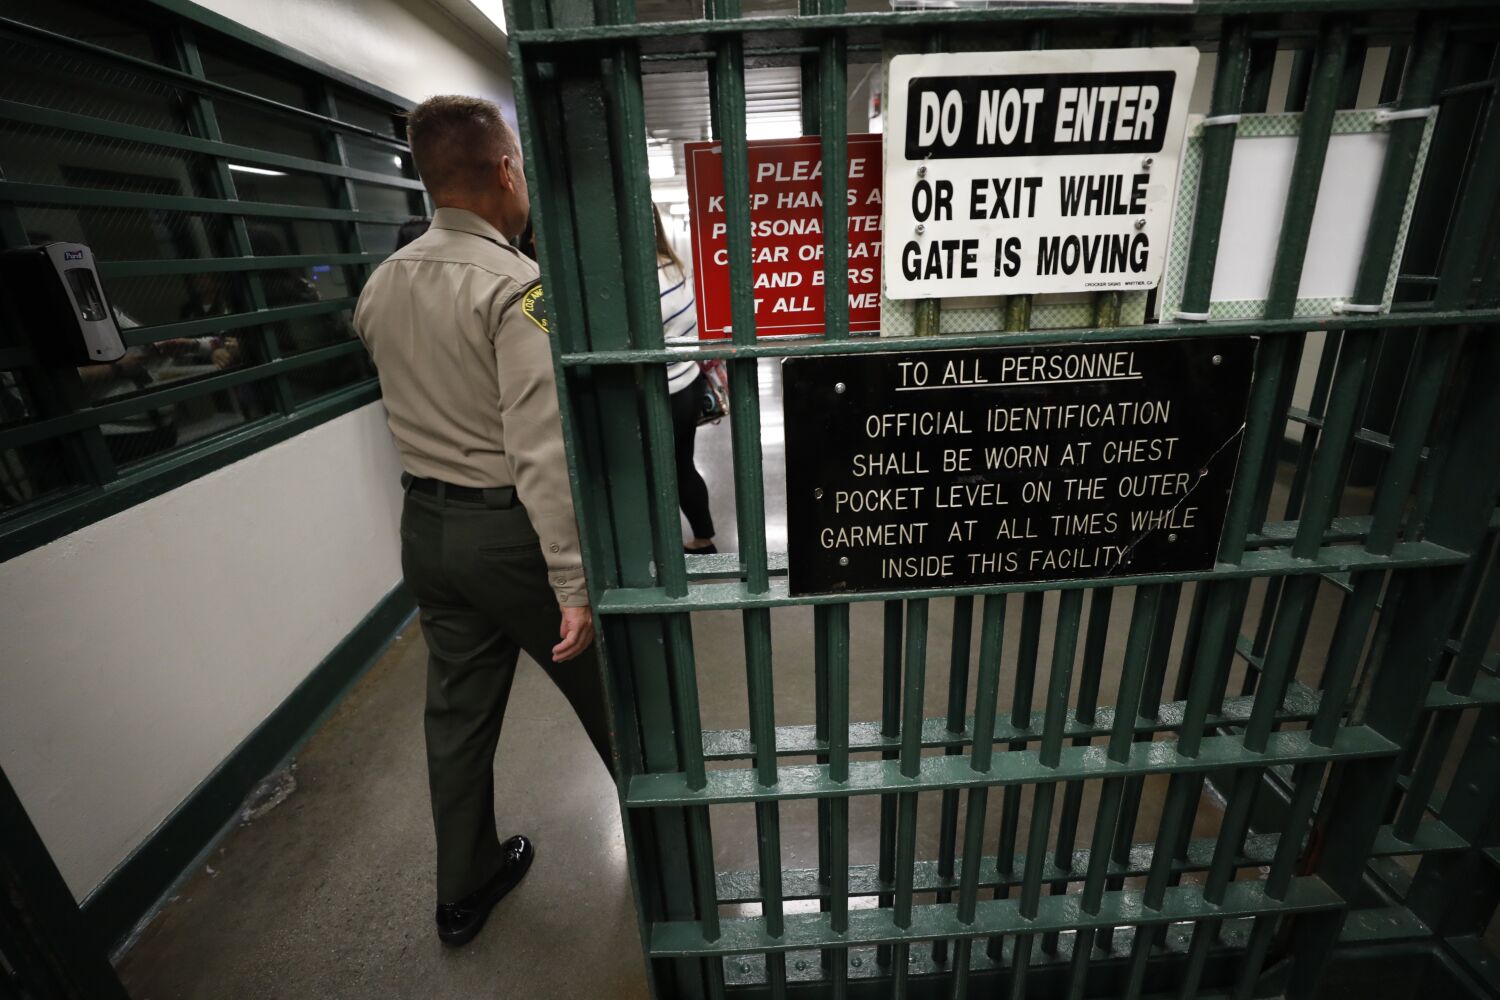 Editorial: 50 Cent and prosectors are wrong about cash bail. L.A. courts get it right